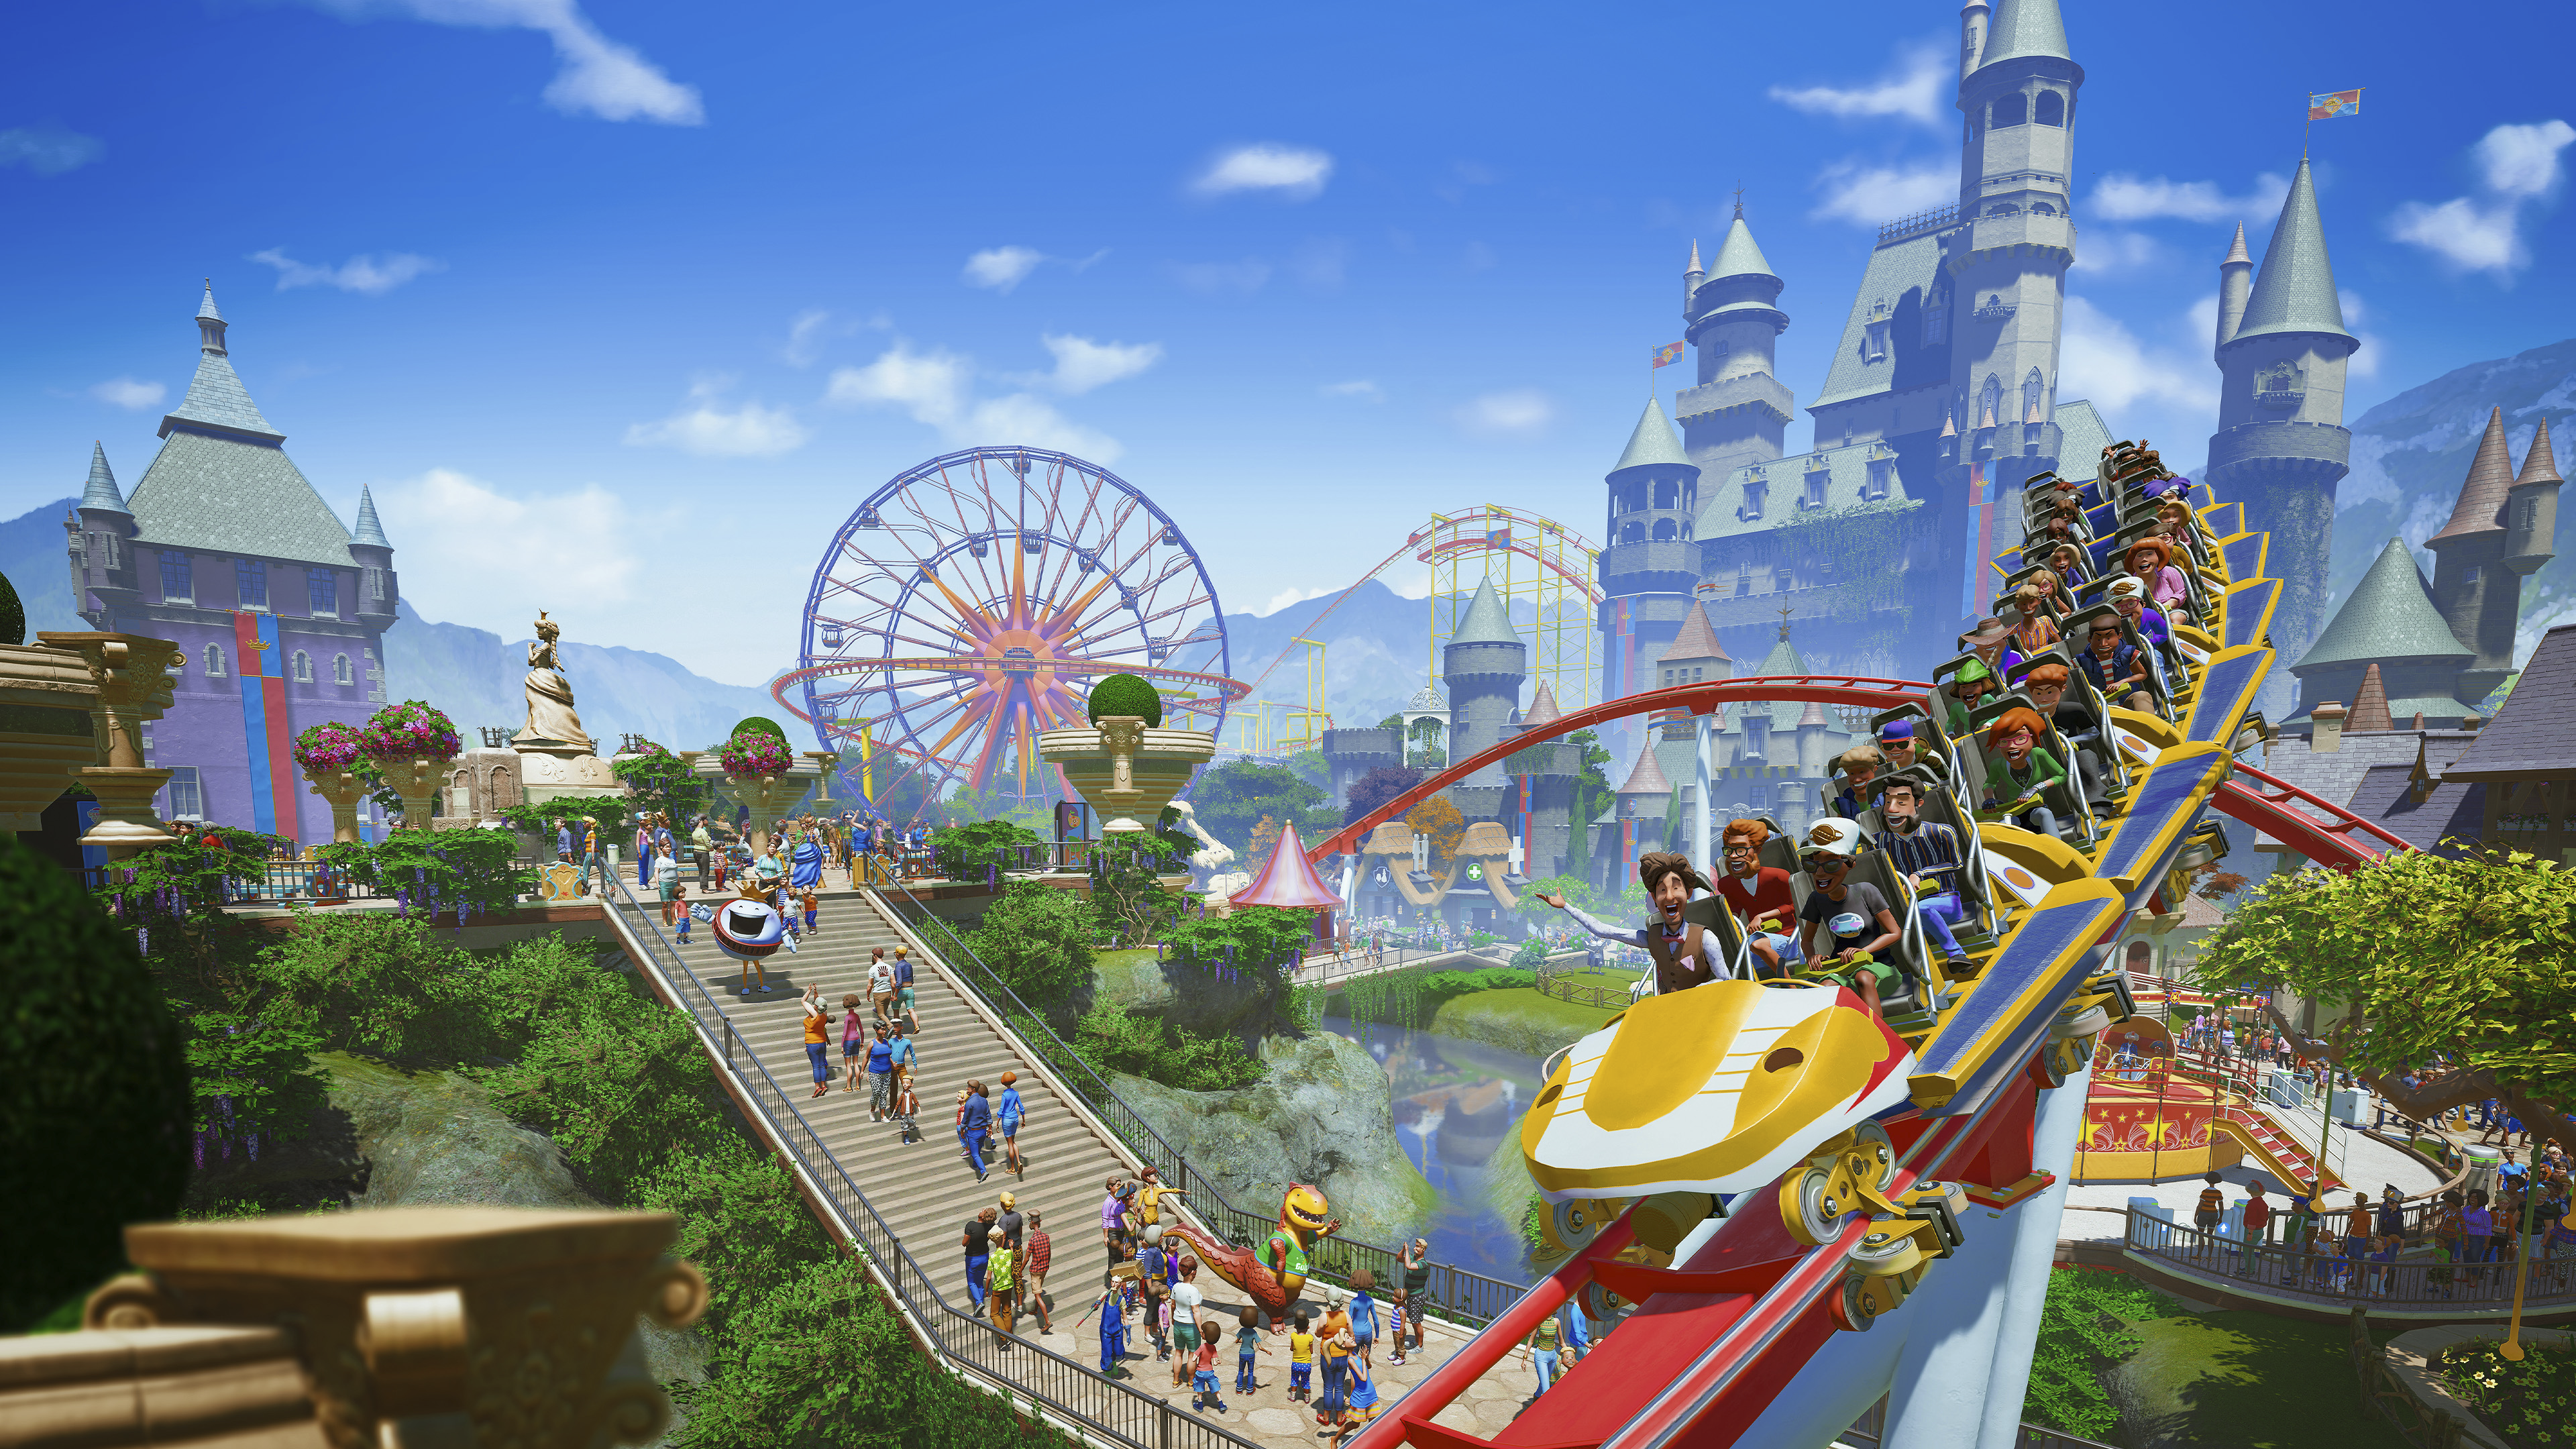 Planet Coaster key art, featuring an elevated shot of a bustling theme park.